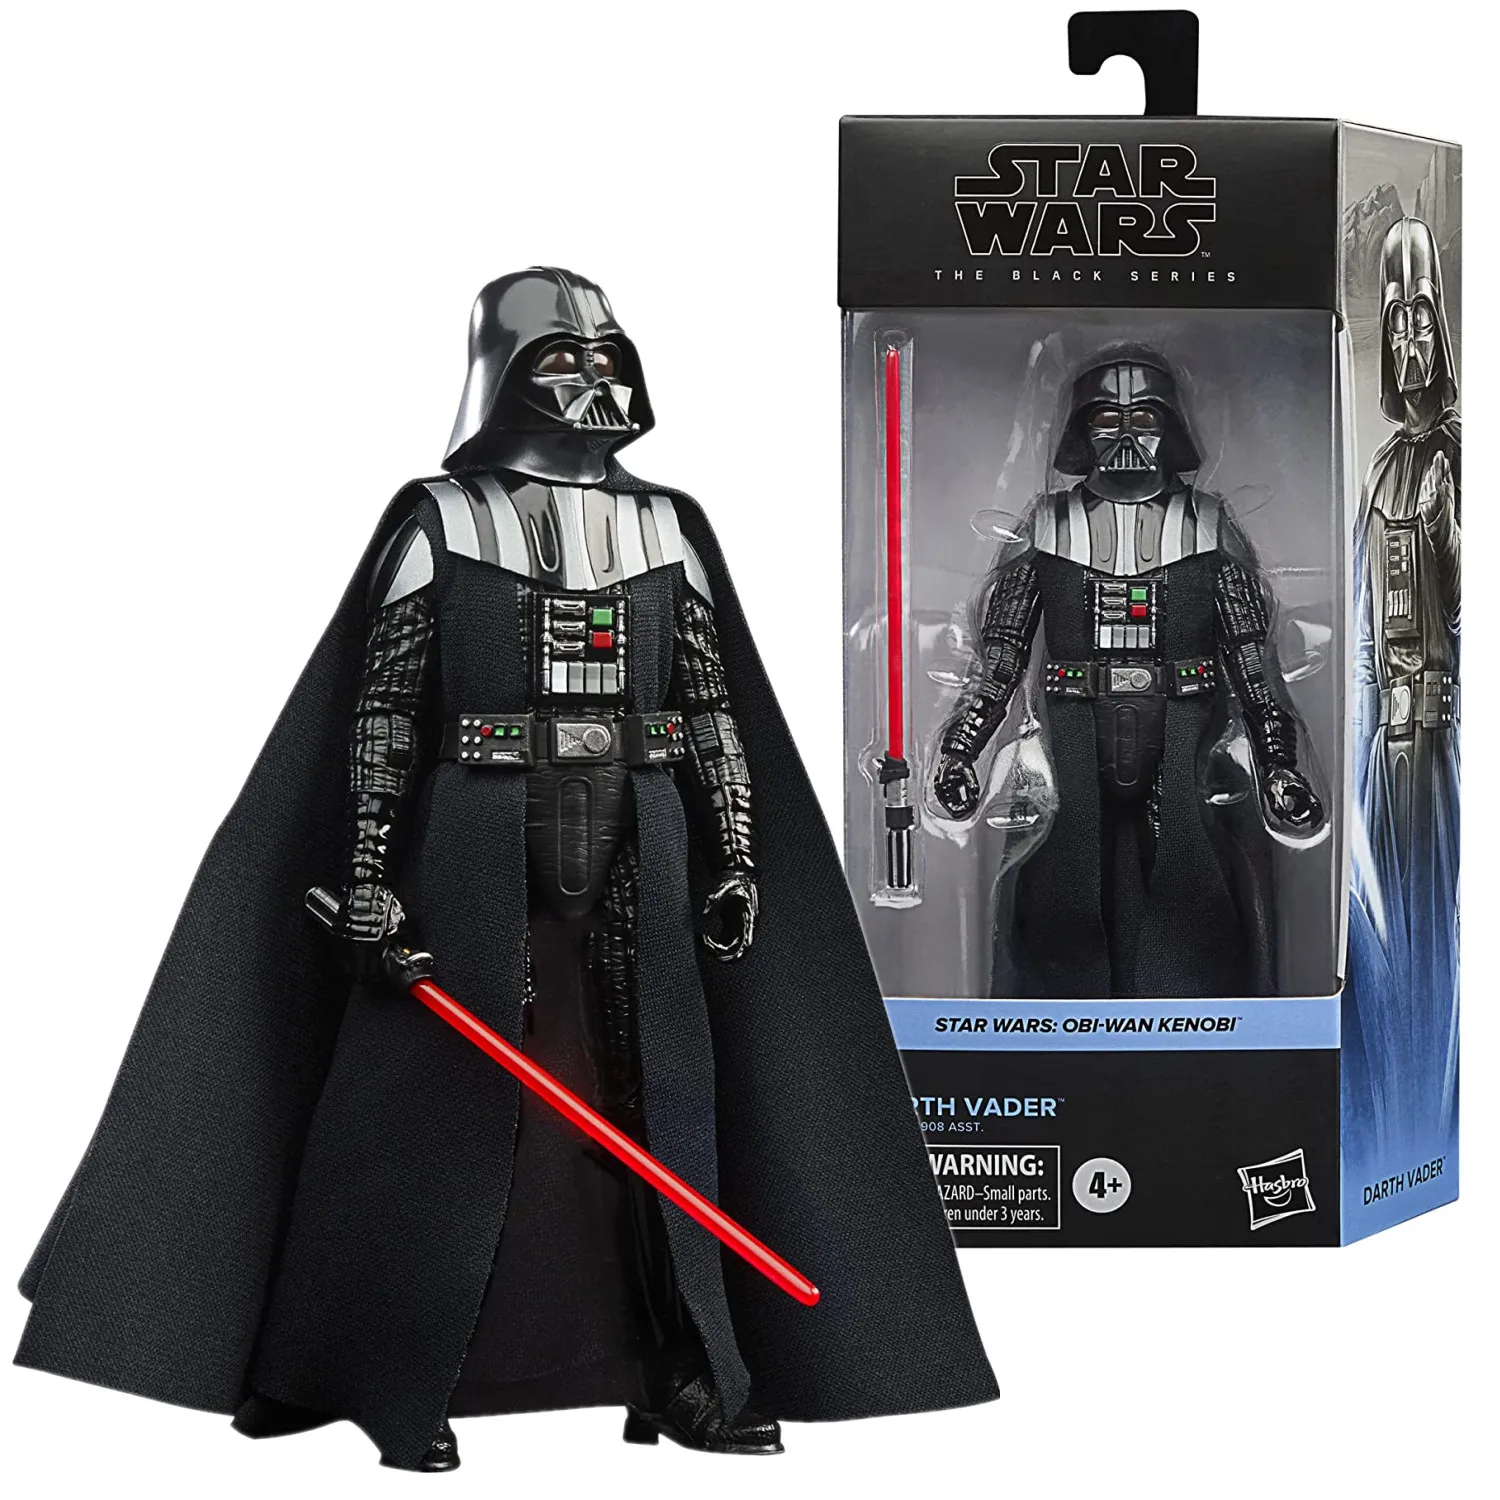 

Hasbro Star Wars The Black Series Darth Vader Toy 6-Inch-Scale OBI-Wan Kenobi Collectible Action Figure Model Toy for Kids F4359